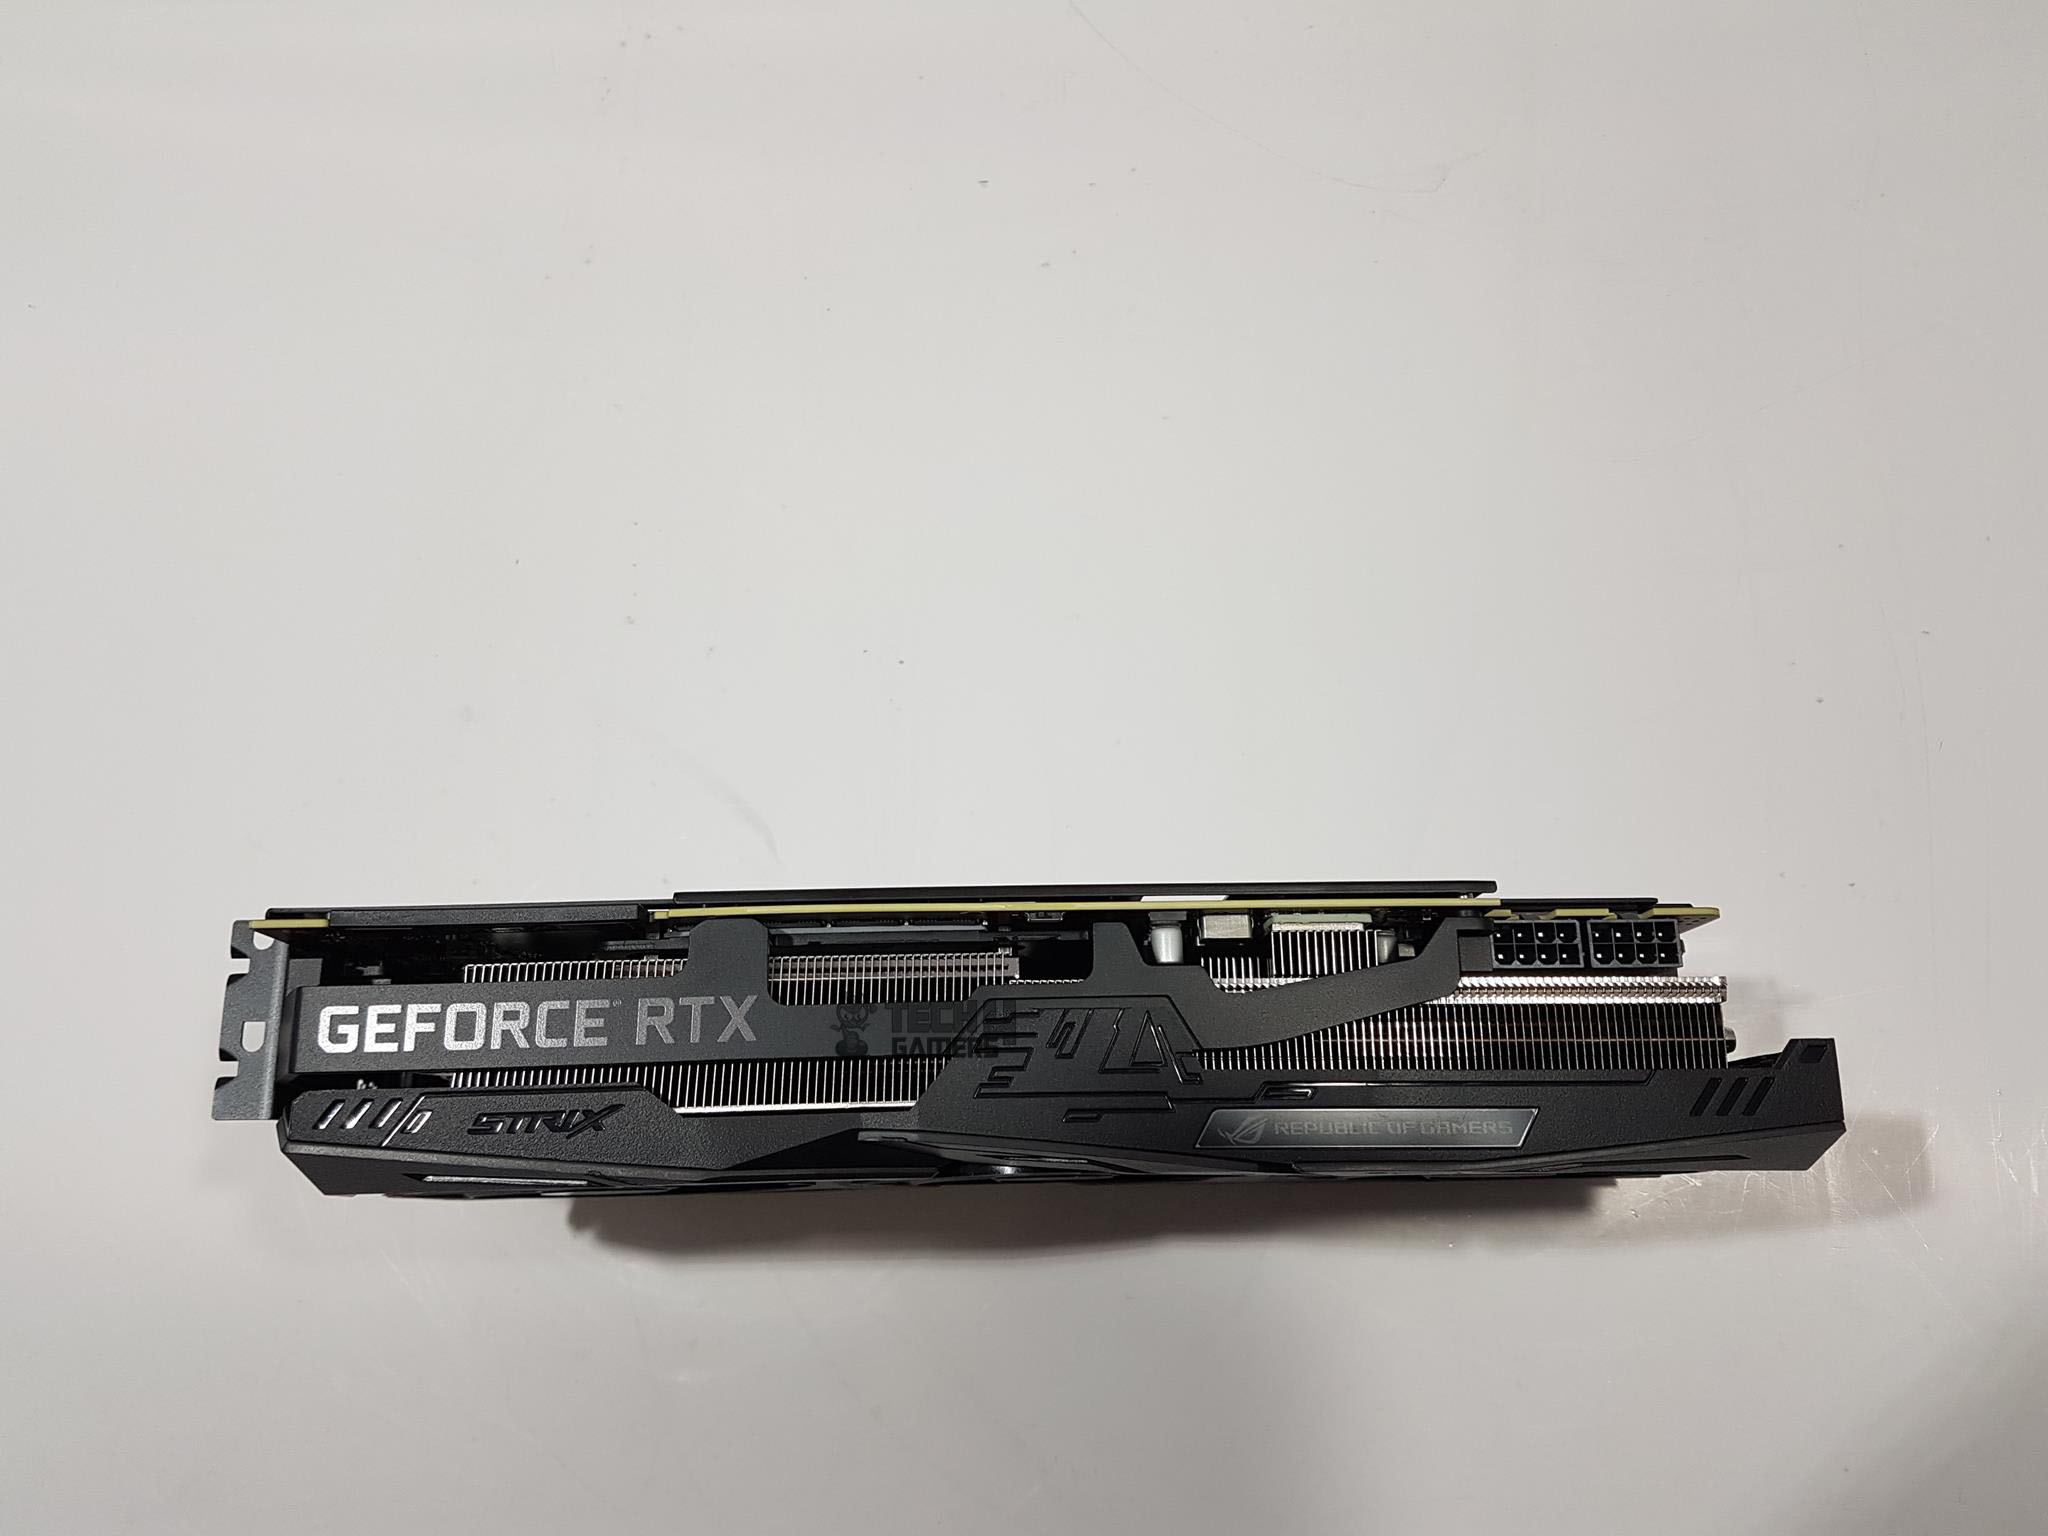 The top side of the graphics card